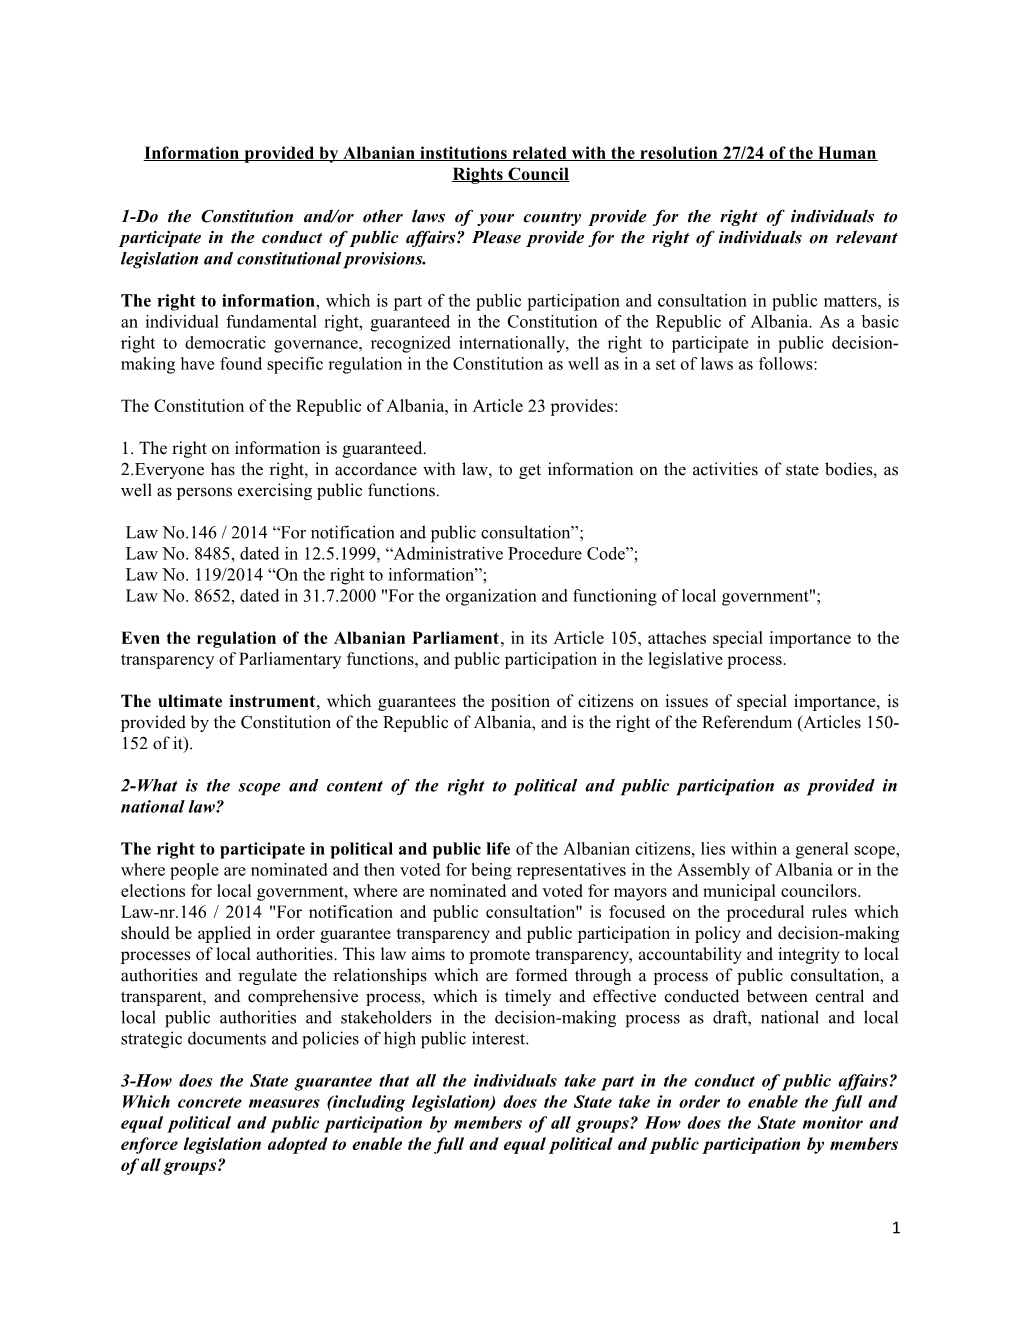 Information Provided by Albanian Institutions Related with the Resolution 27/24 of The